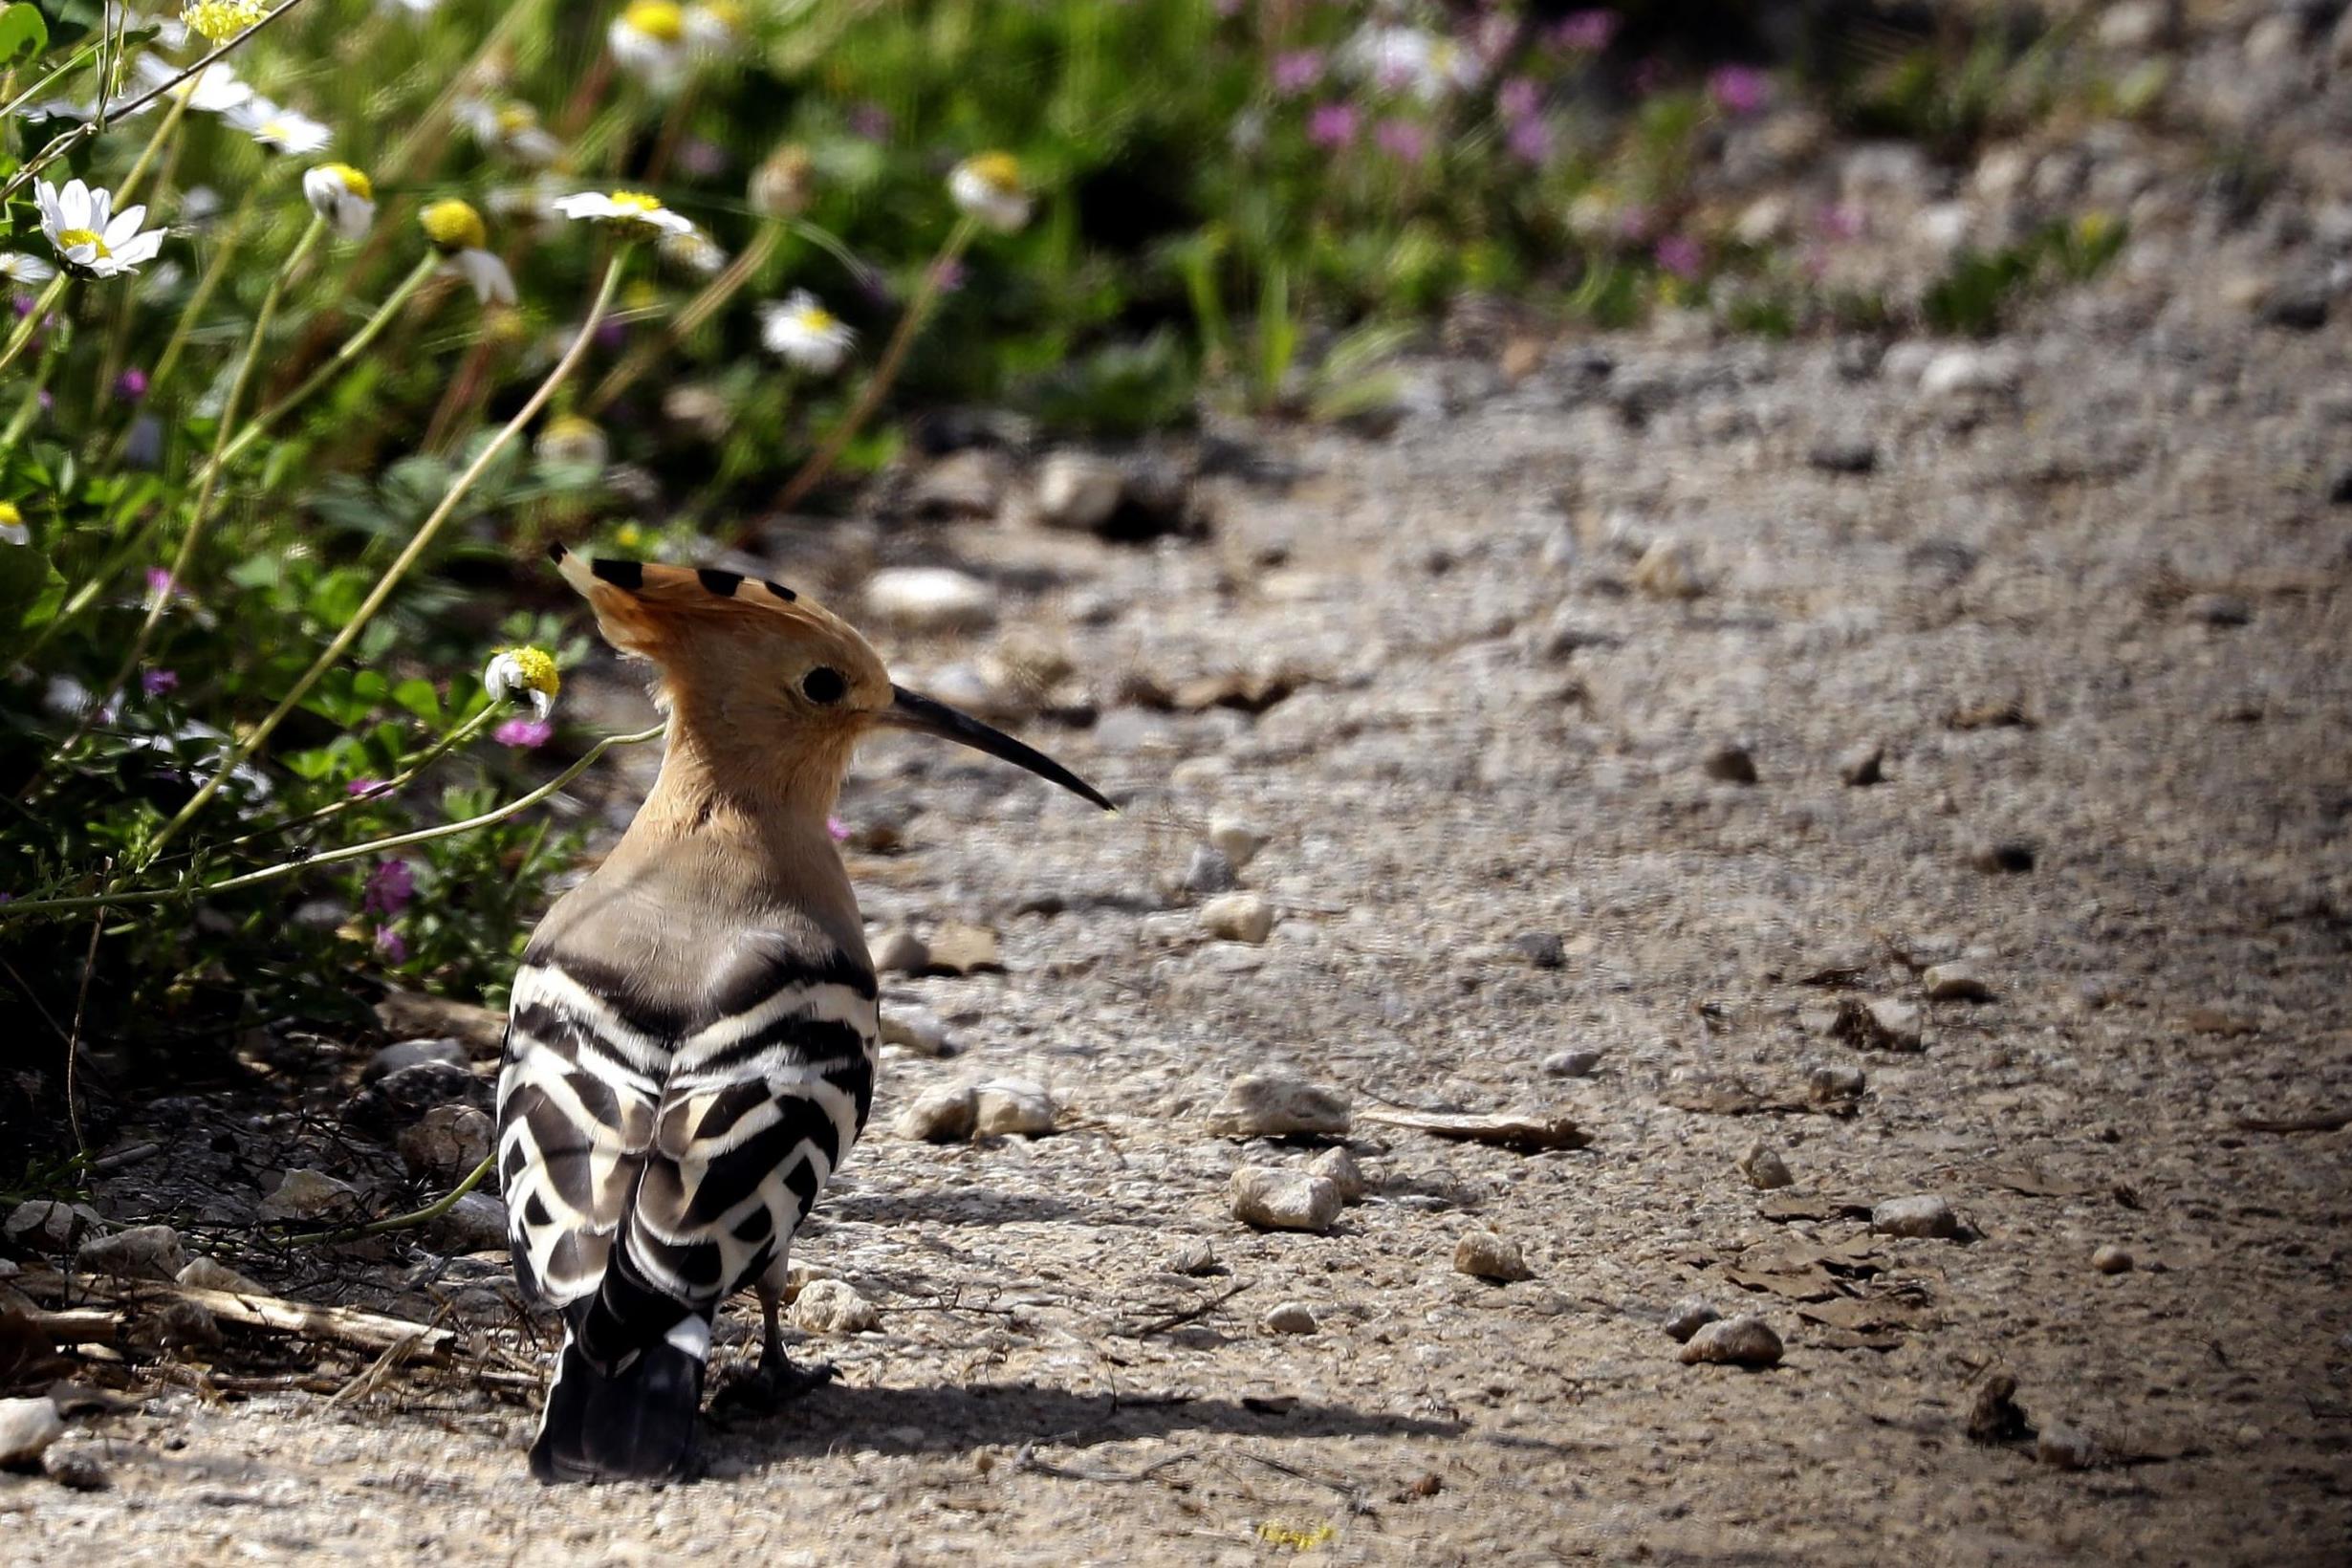 A hoopoe bird is seen in a field in the village of Damour, south of Beirut (Getty)